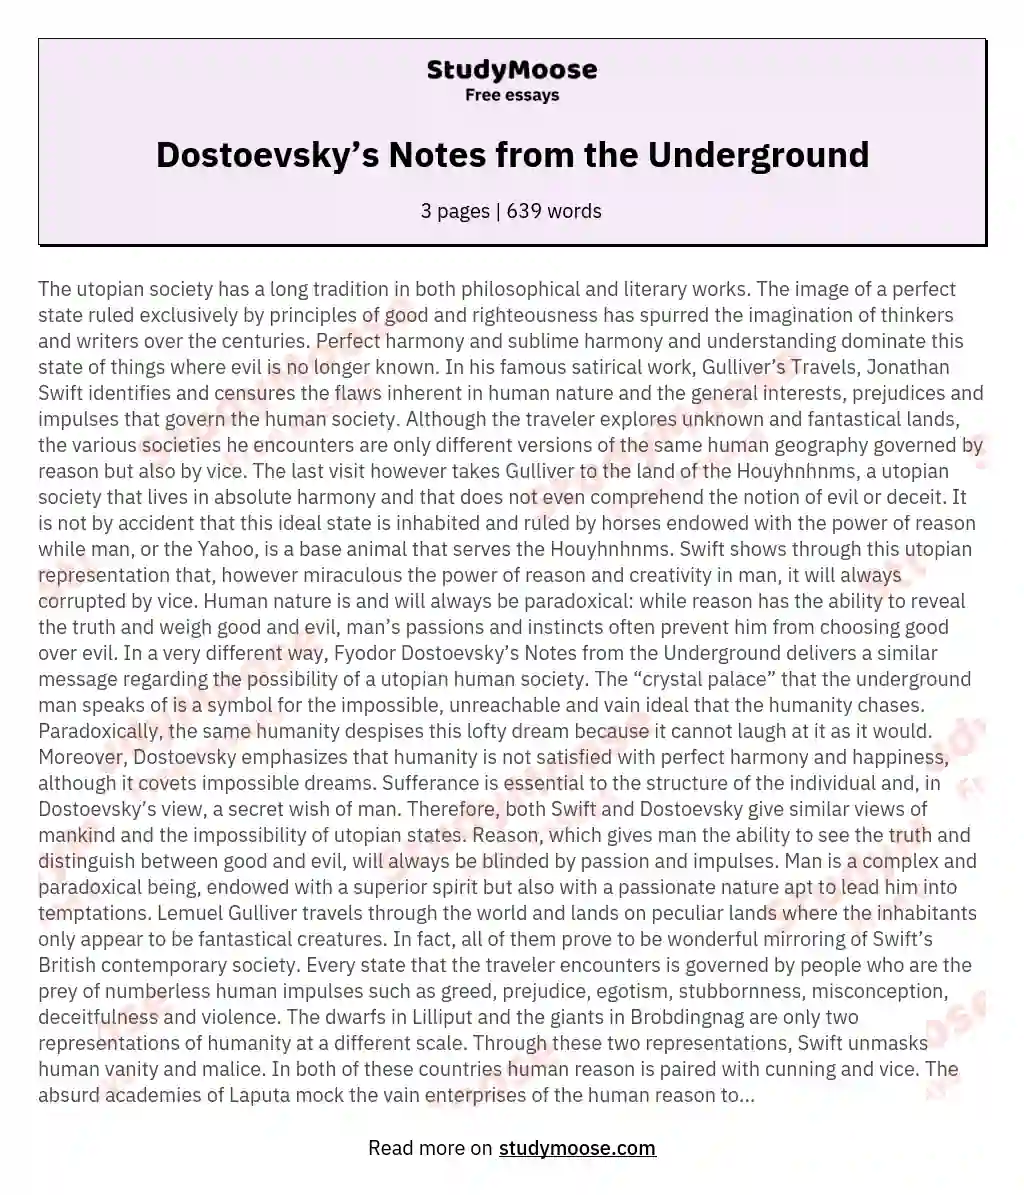 Dostoevsky’s Notes from the Underground essay